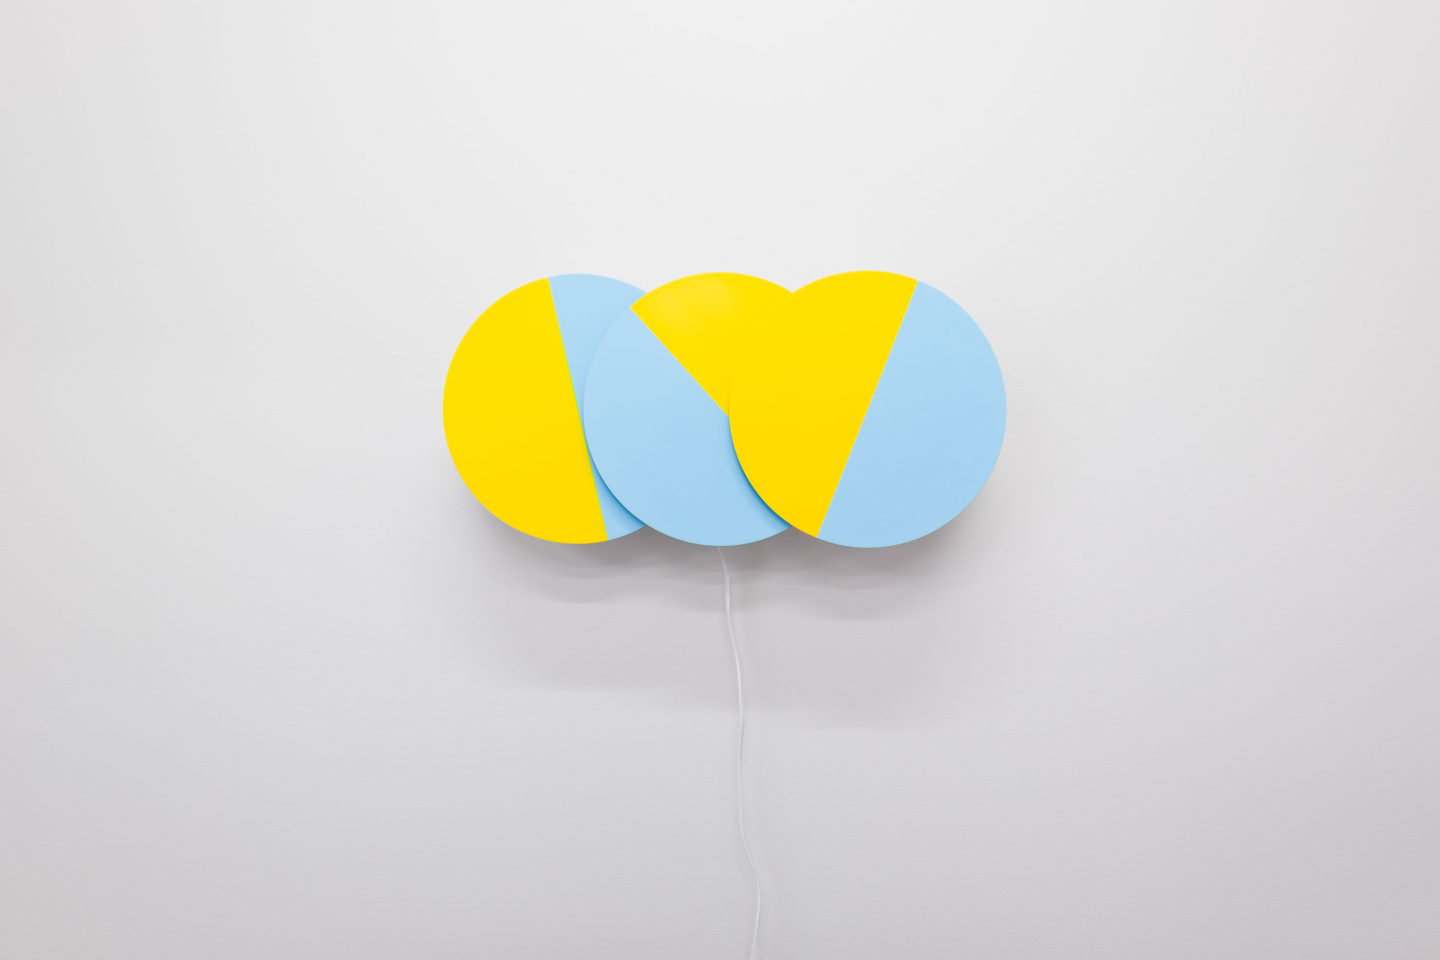 P!, karel_martens_DSF5814_low_res Karel Martens, Three Times (in Blue and Yellow), 2016